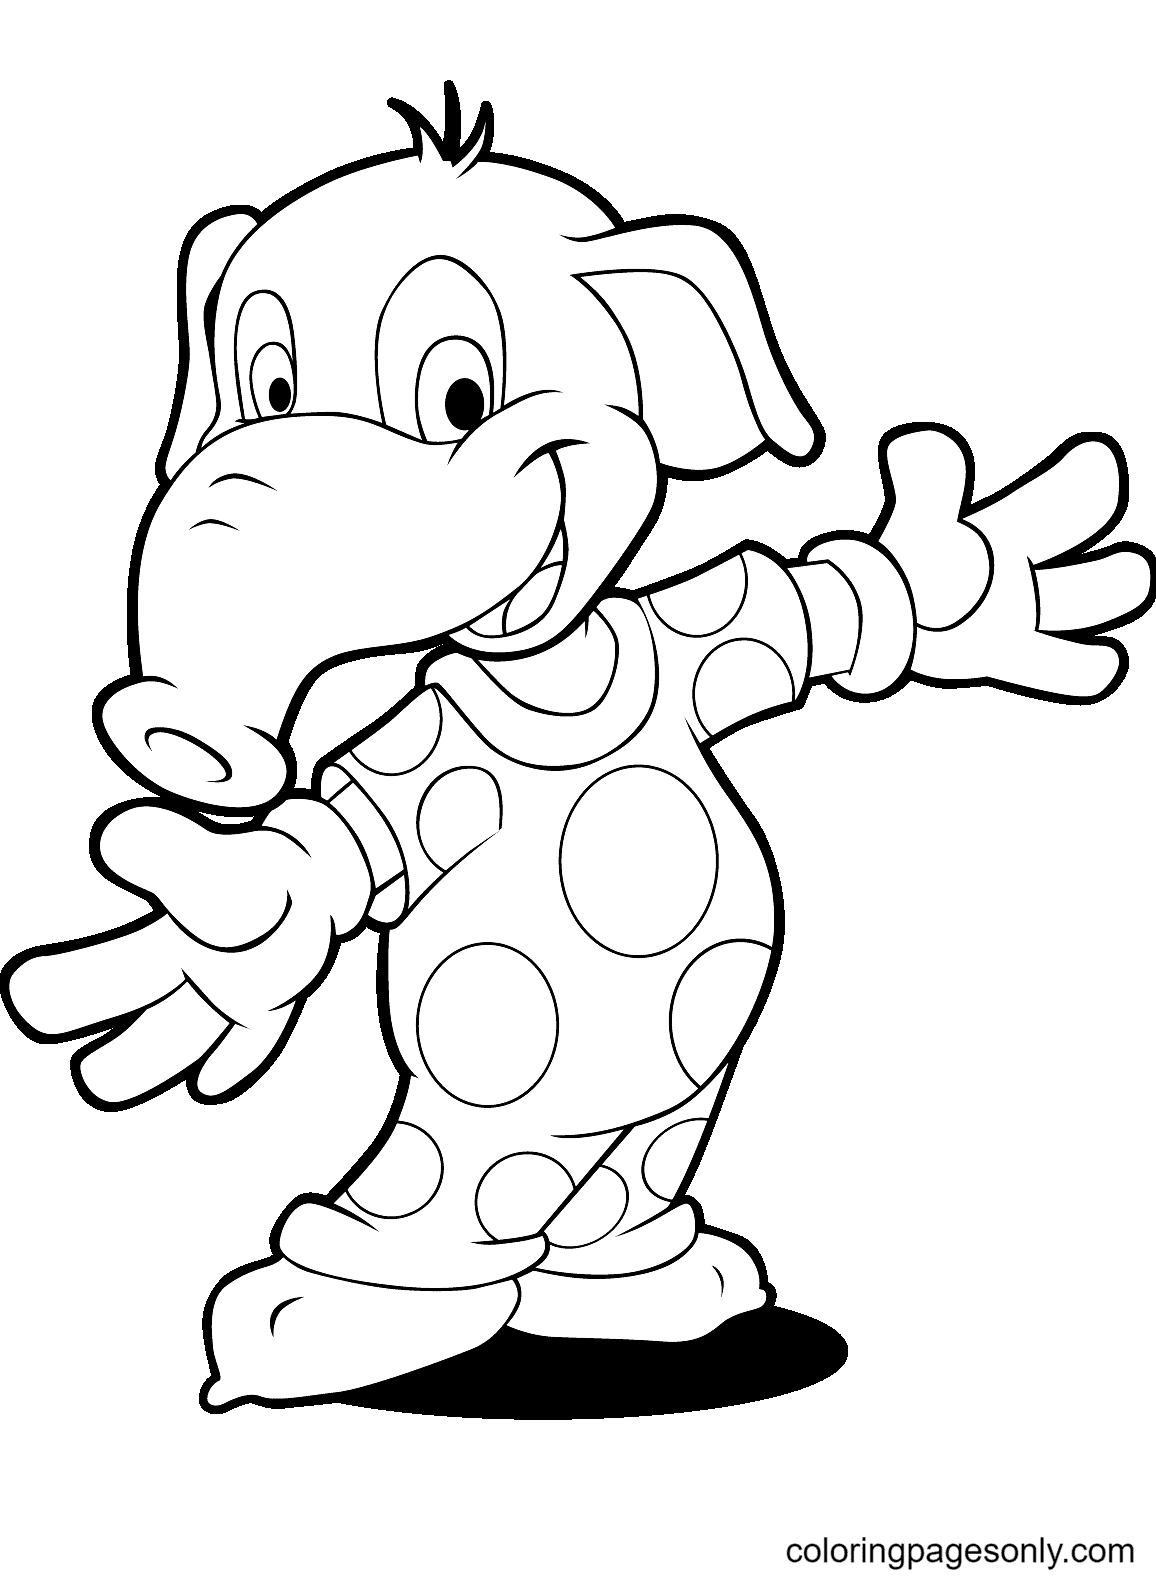 Adorable Cartoon Elephant Coloring Page